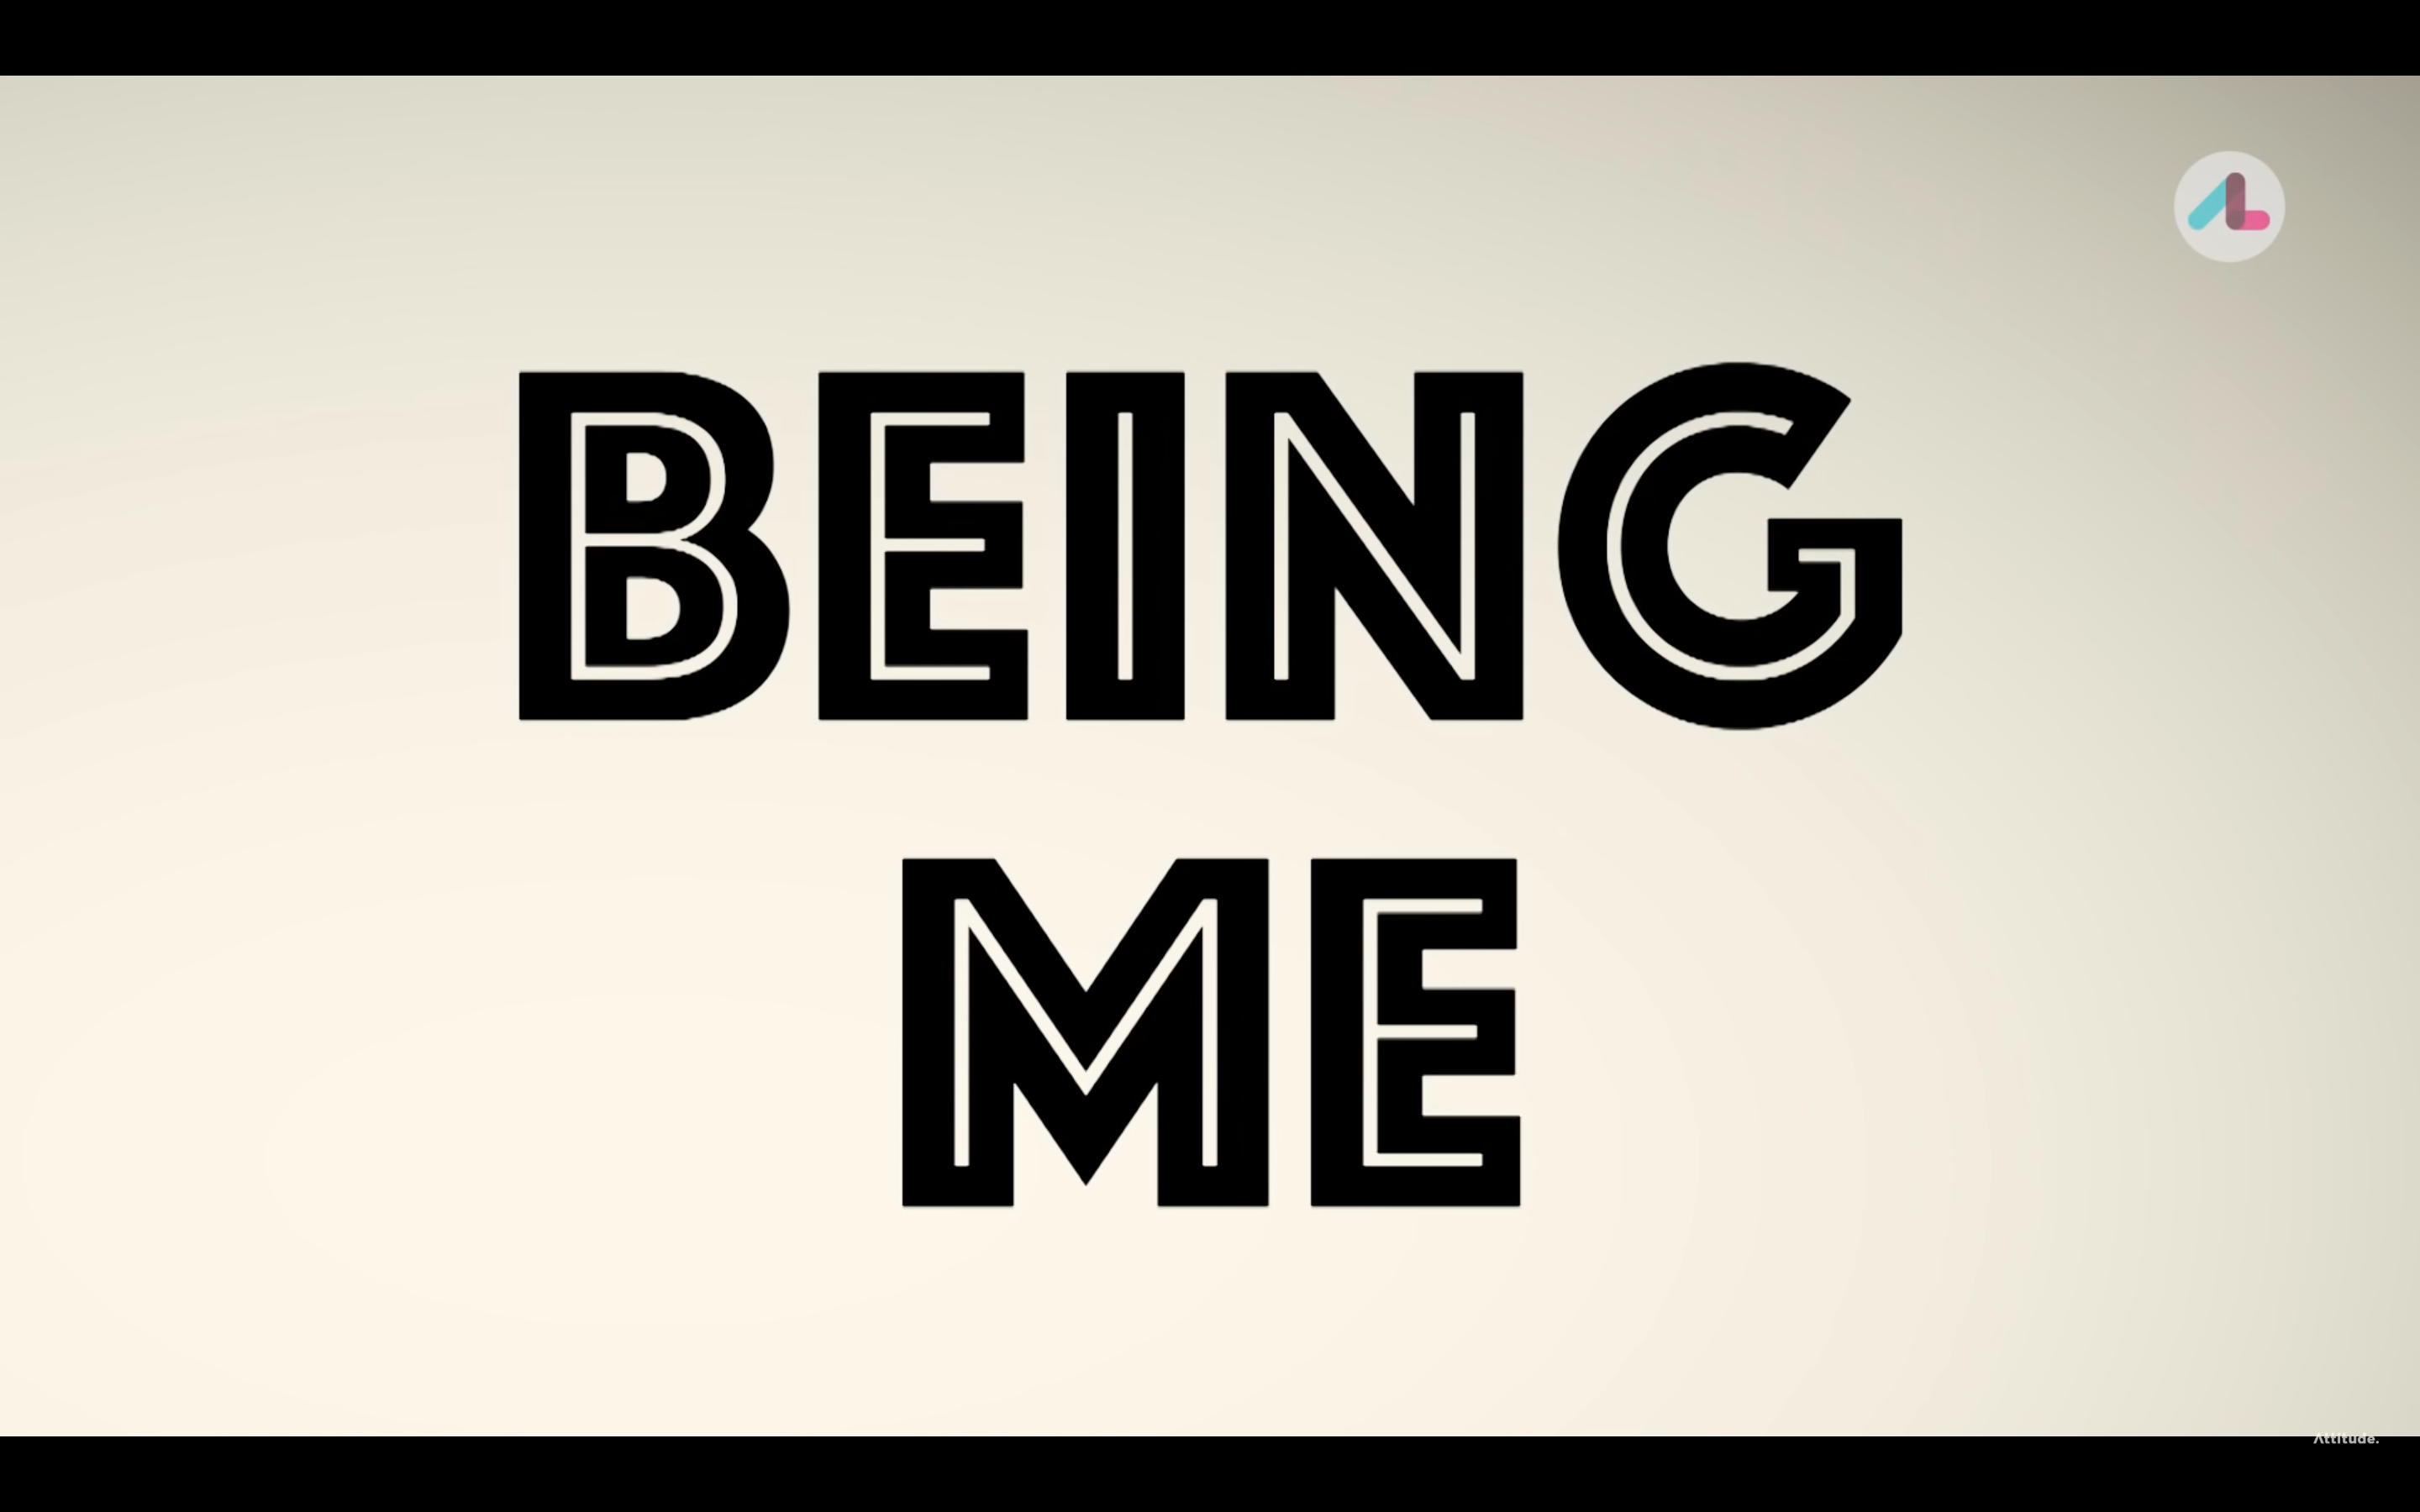 Deaf and Blind: Being Me Heather